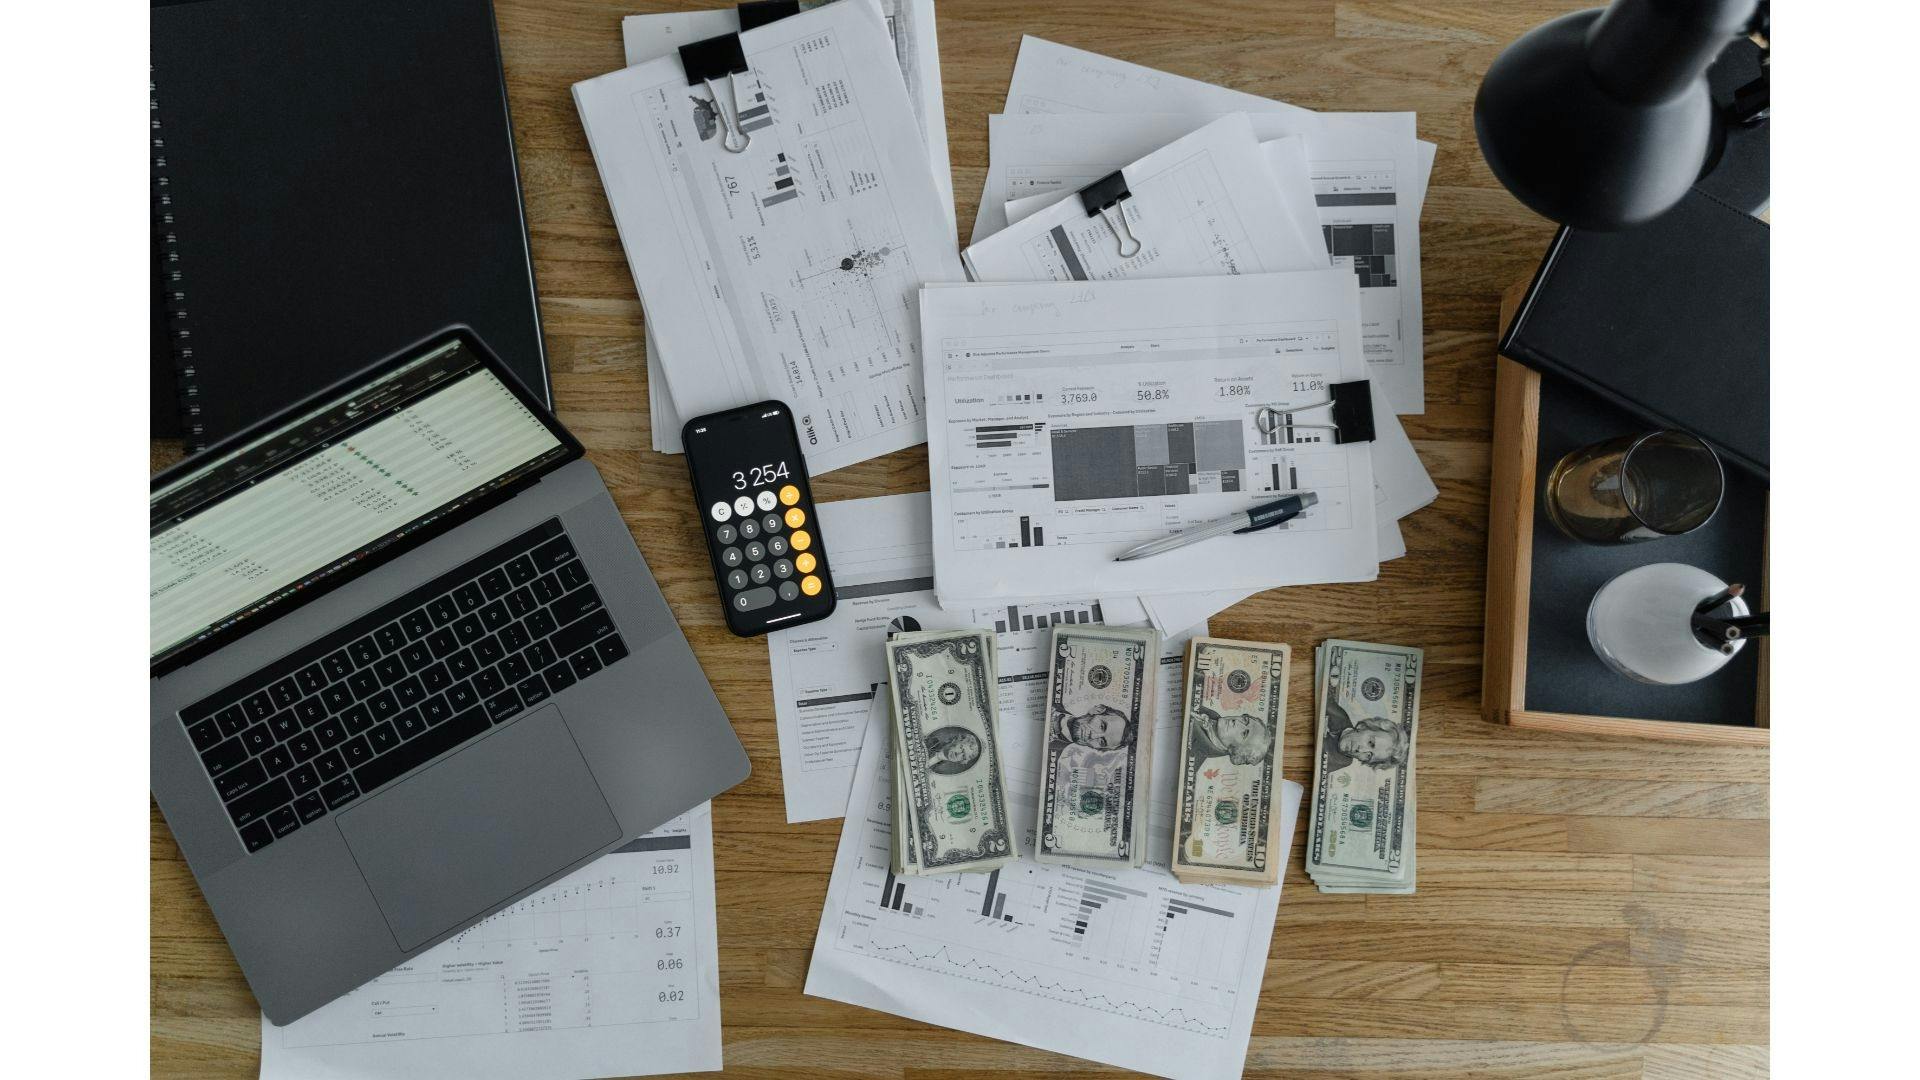 Cash, laptop, cellphone and other documents in the table